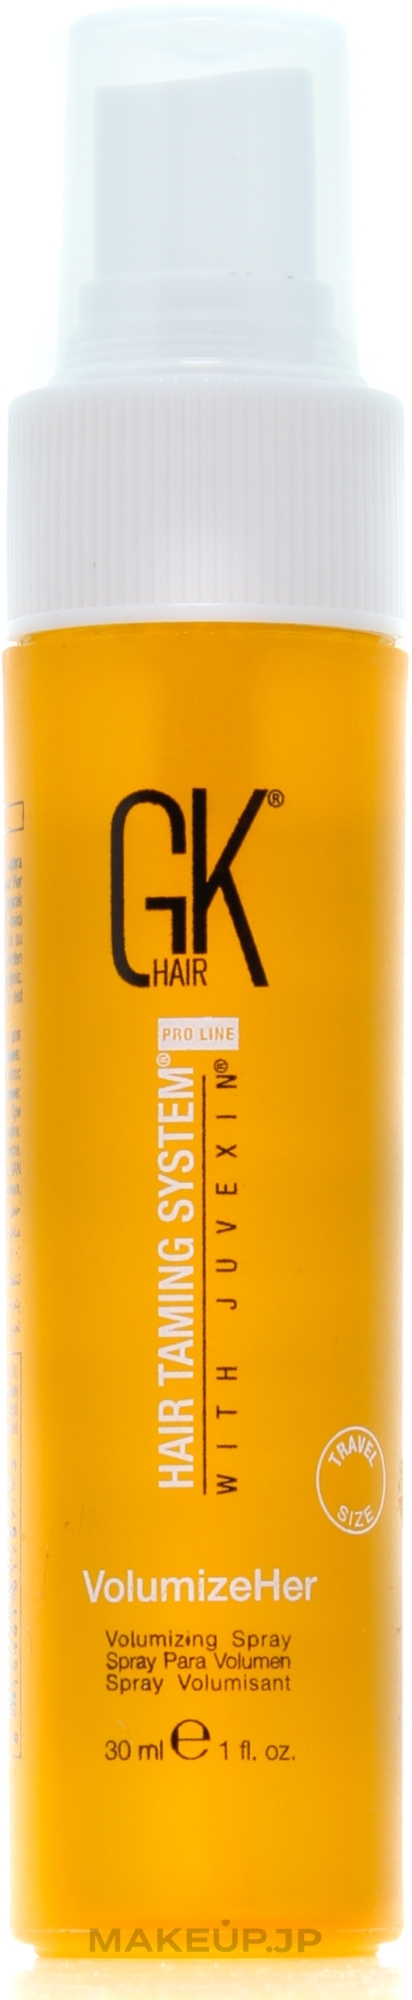 Root Volume Hair Spray - GKhair Volumize Her Spray With Juvexin — photo 30 ml